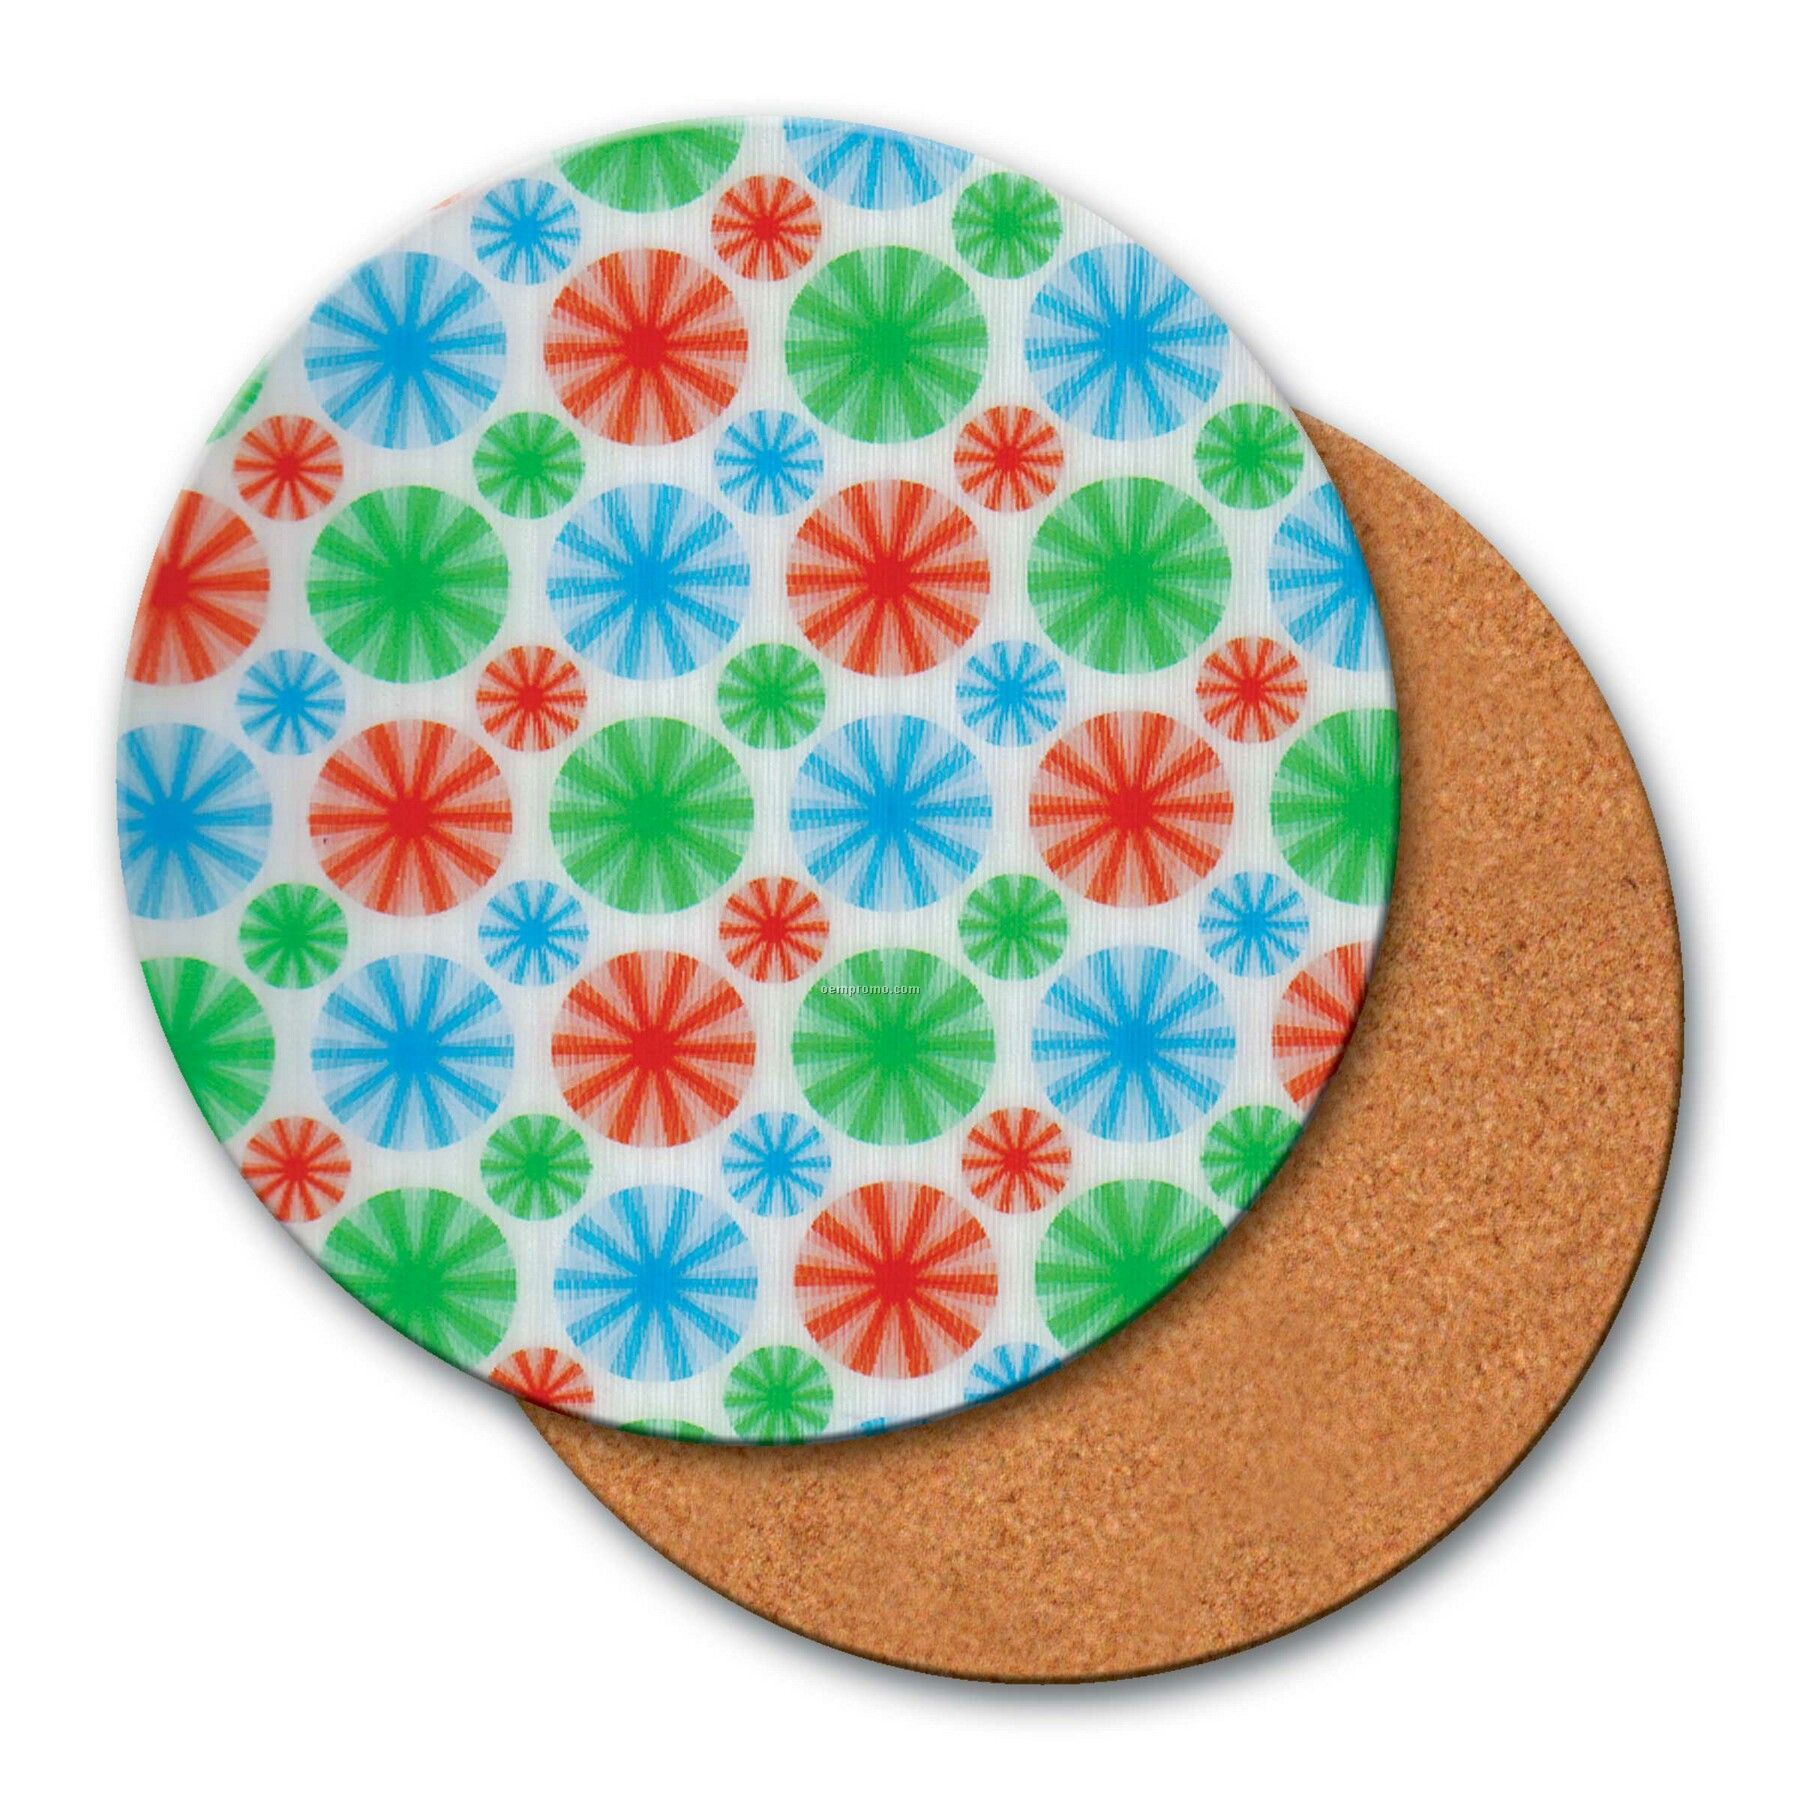 4" Round Coaster W/3d Lenticular Animated Spinning Wheels (Blanks)